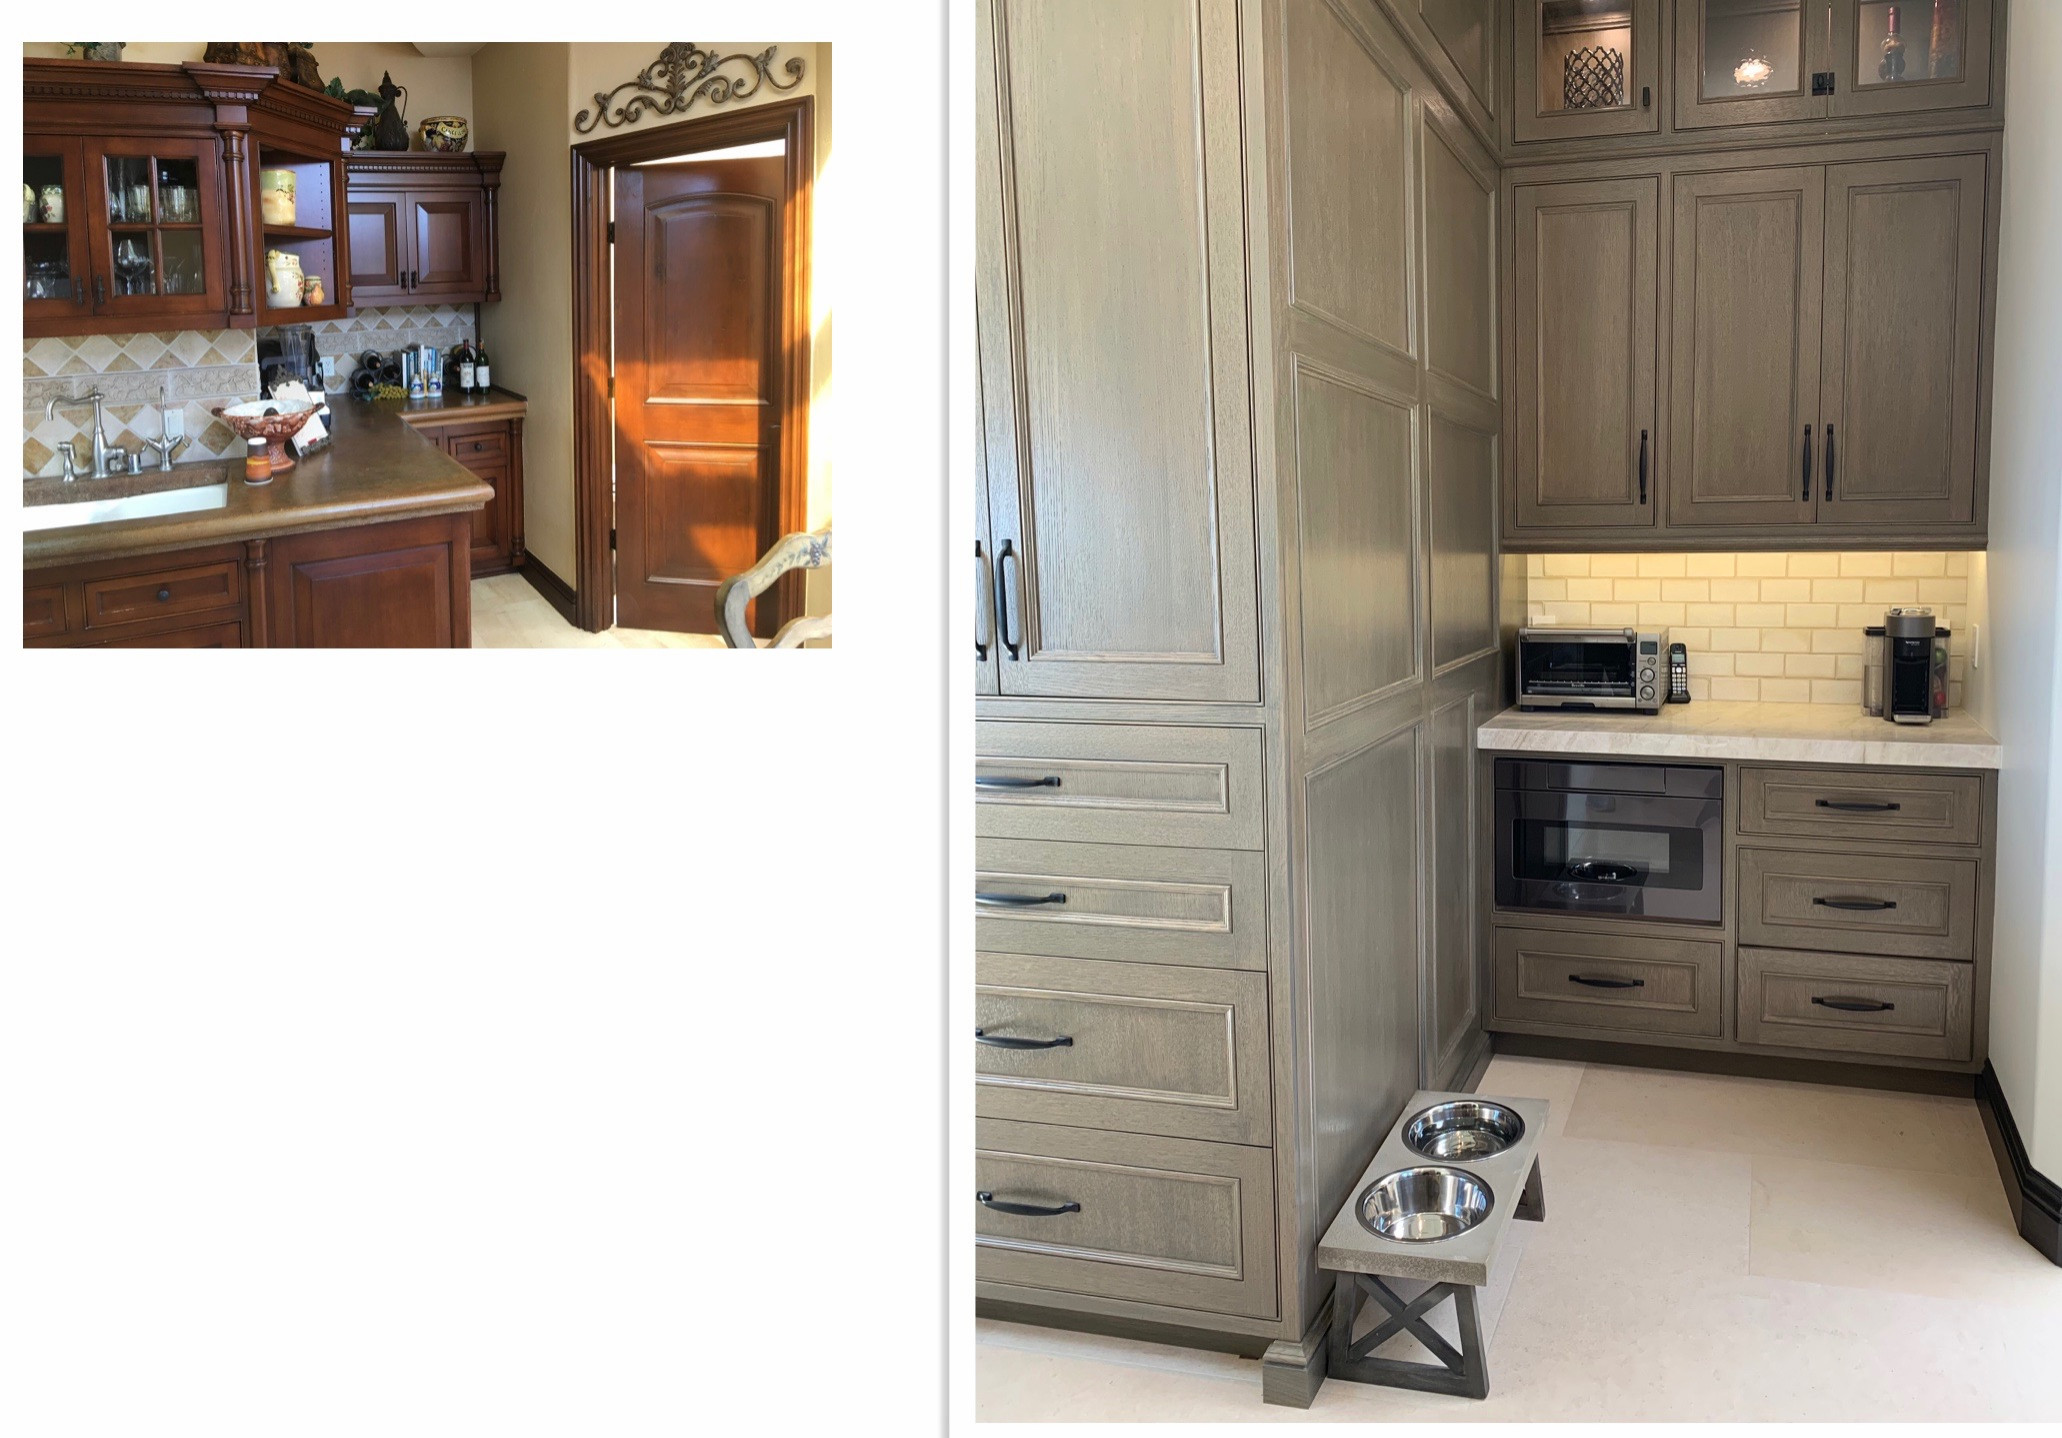 BEFORE & AFTER KITCHEN